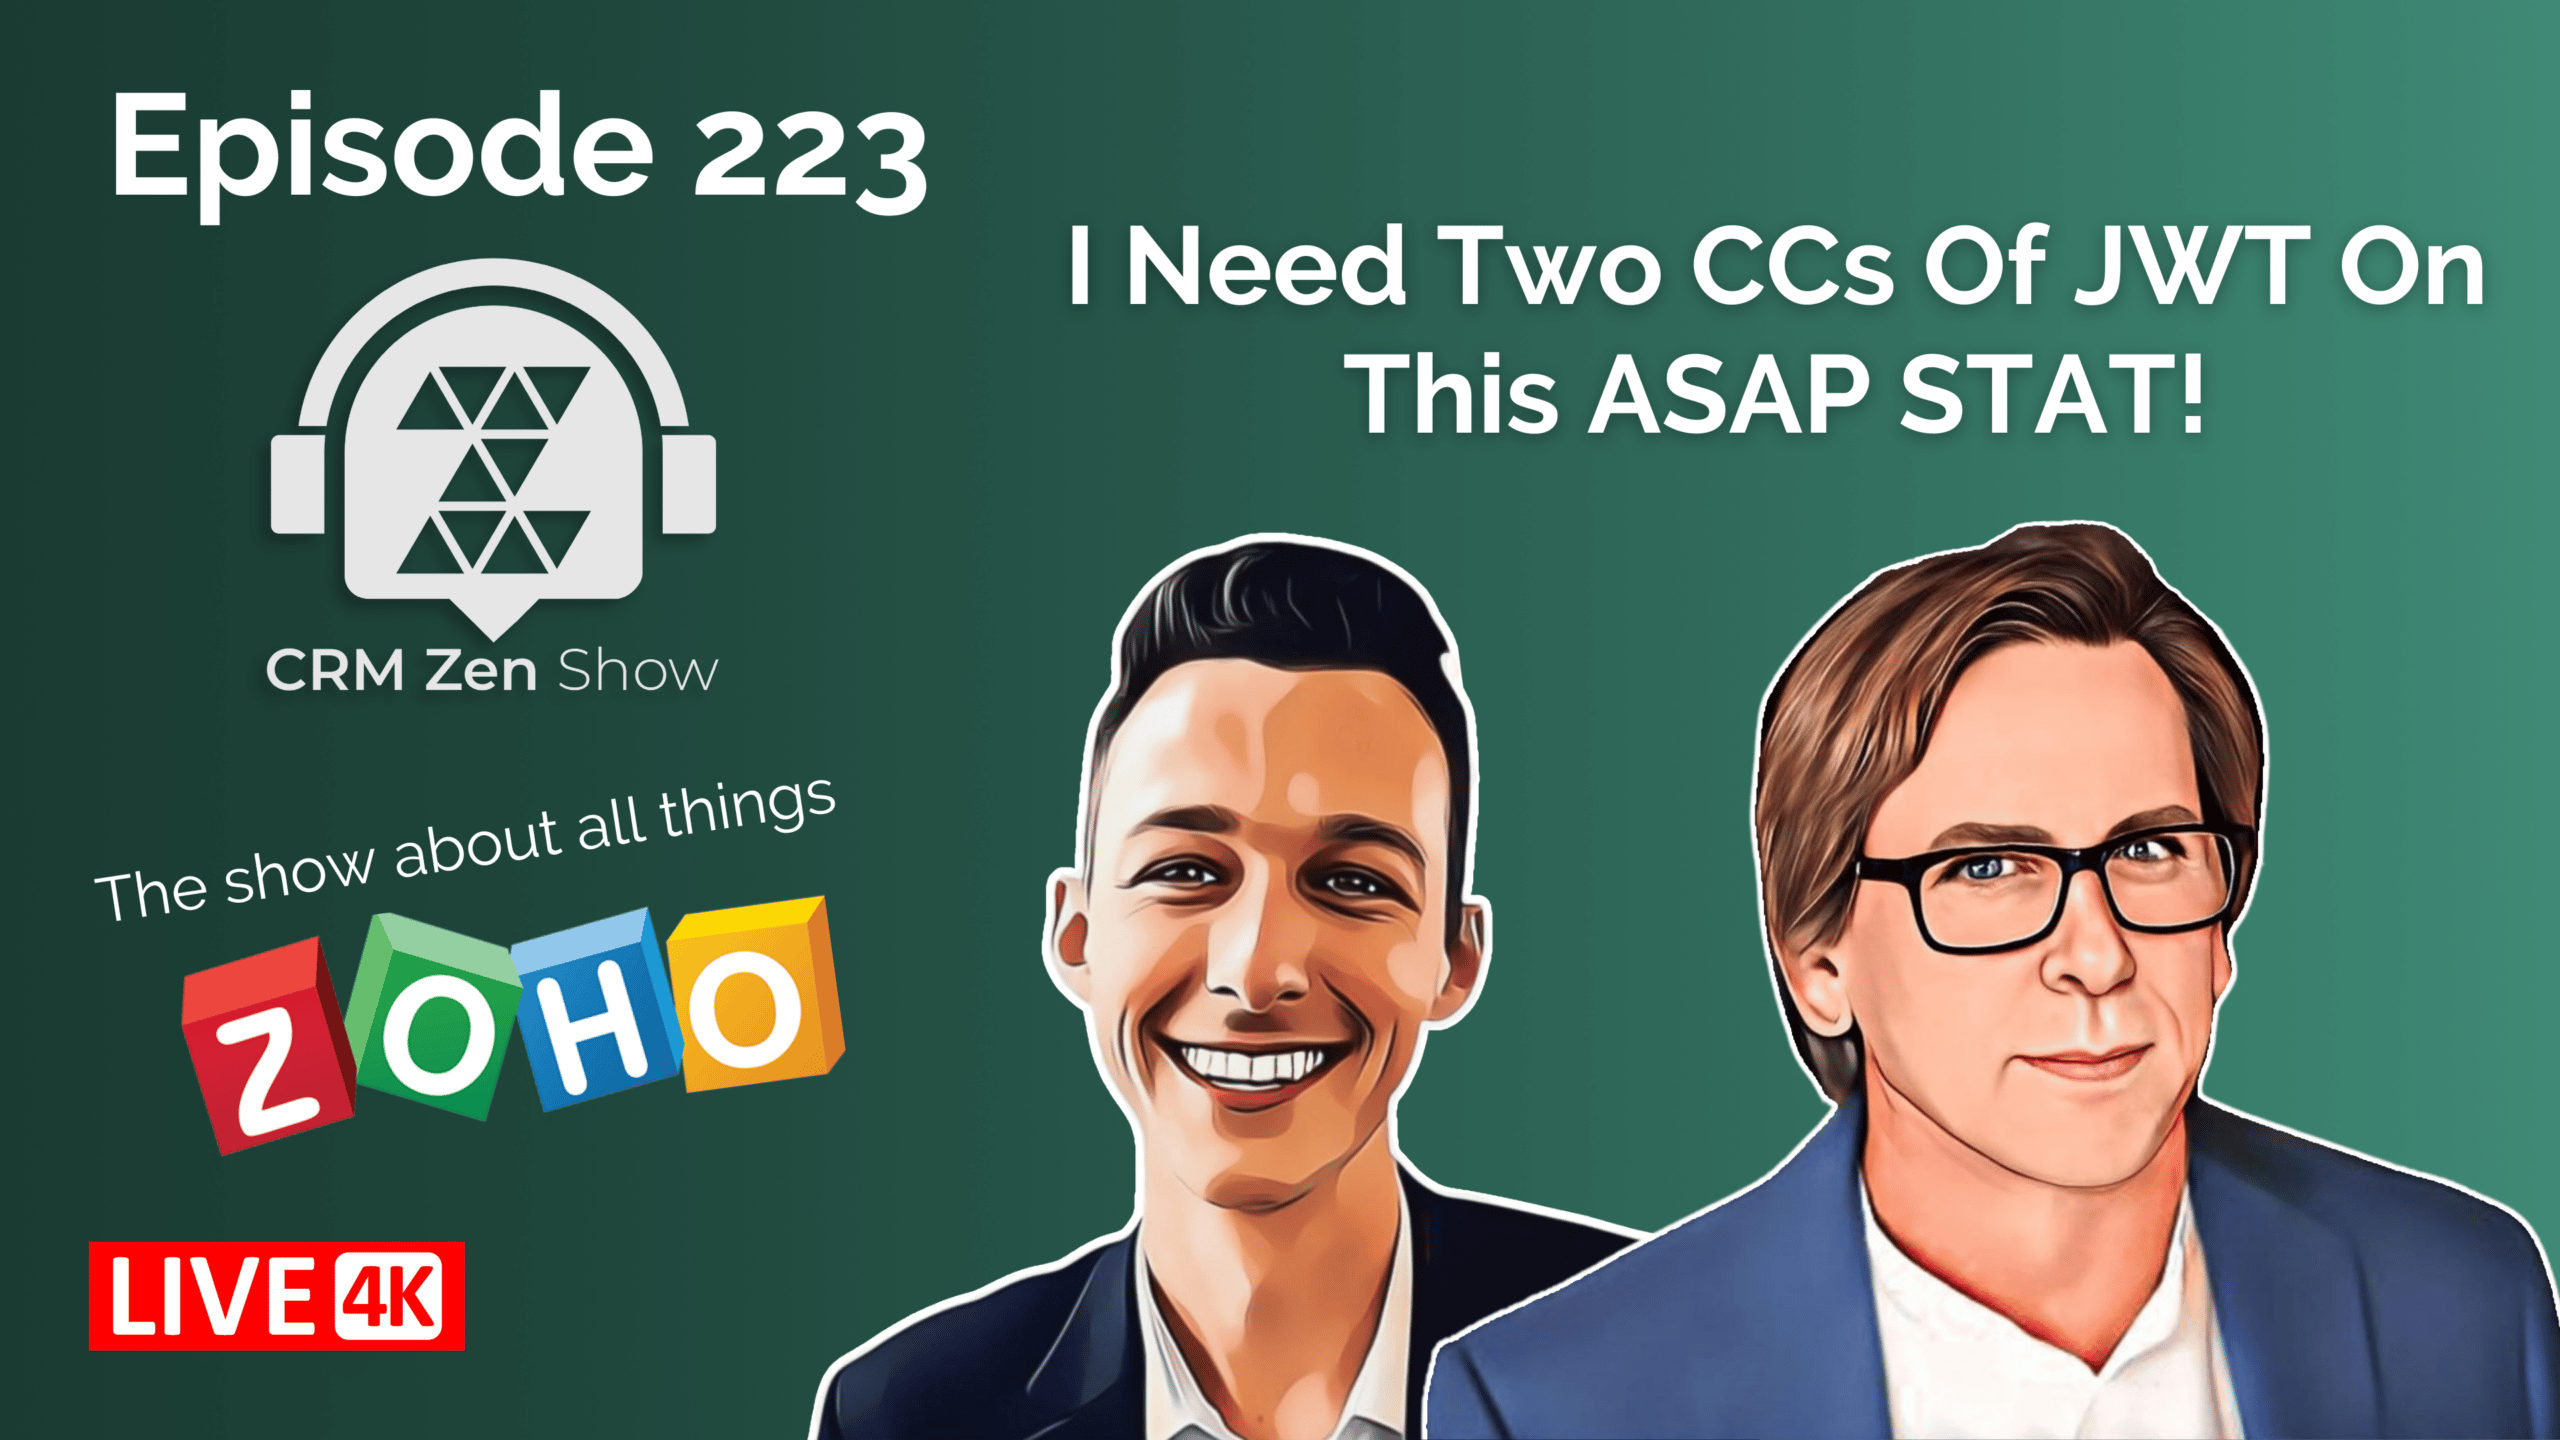 CRM Zen Show Episode 223 - I Need Two CCs Of JWT On This ASAP STAT!